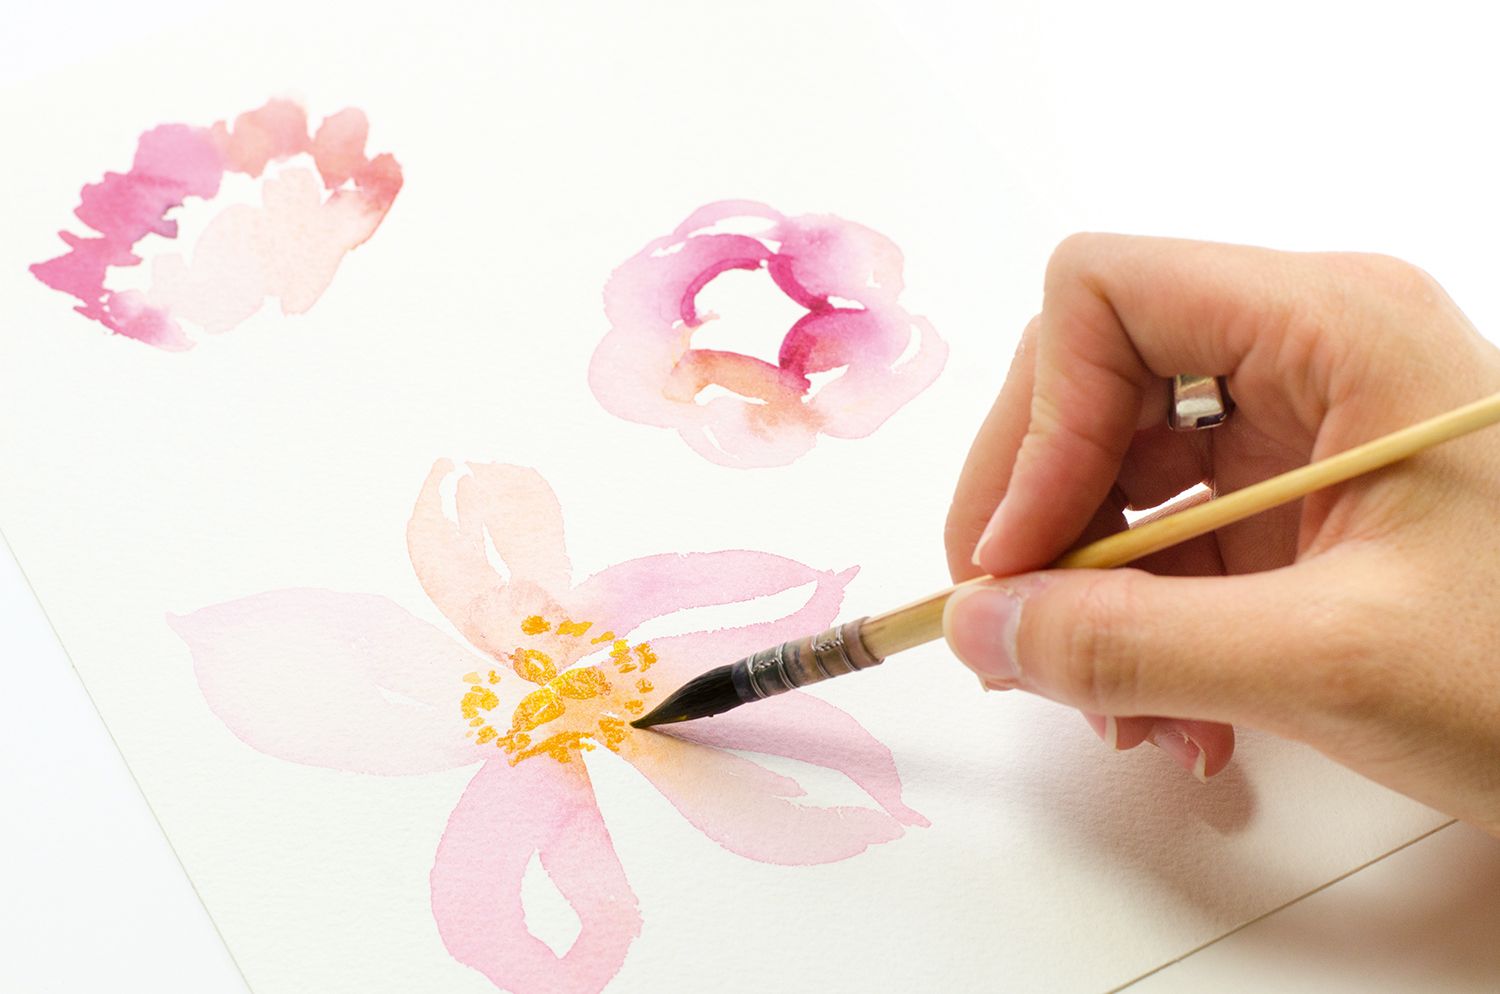 30 easy watercolor painting ideas to inspire you  Gathered